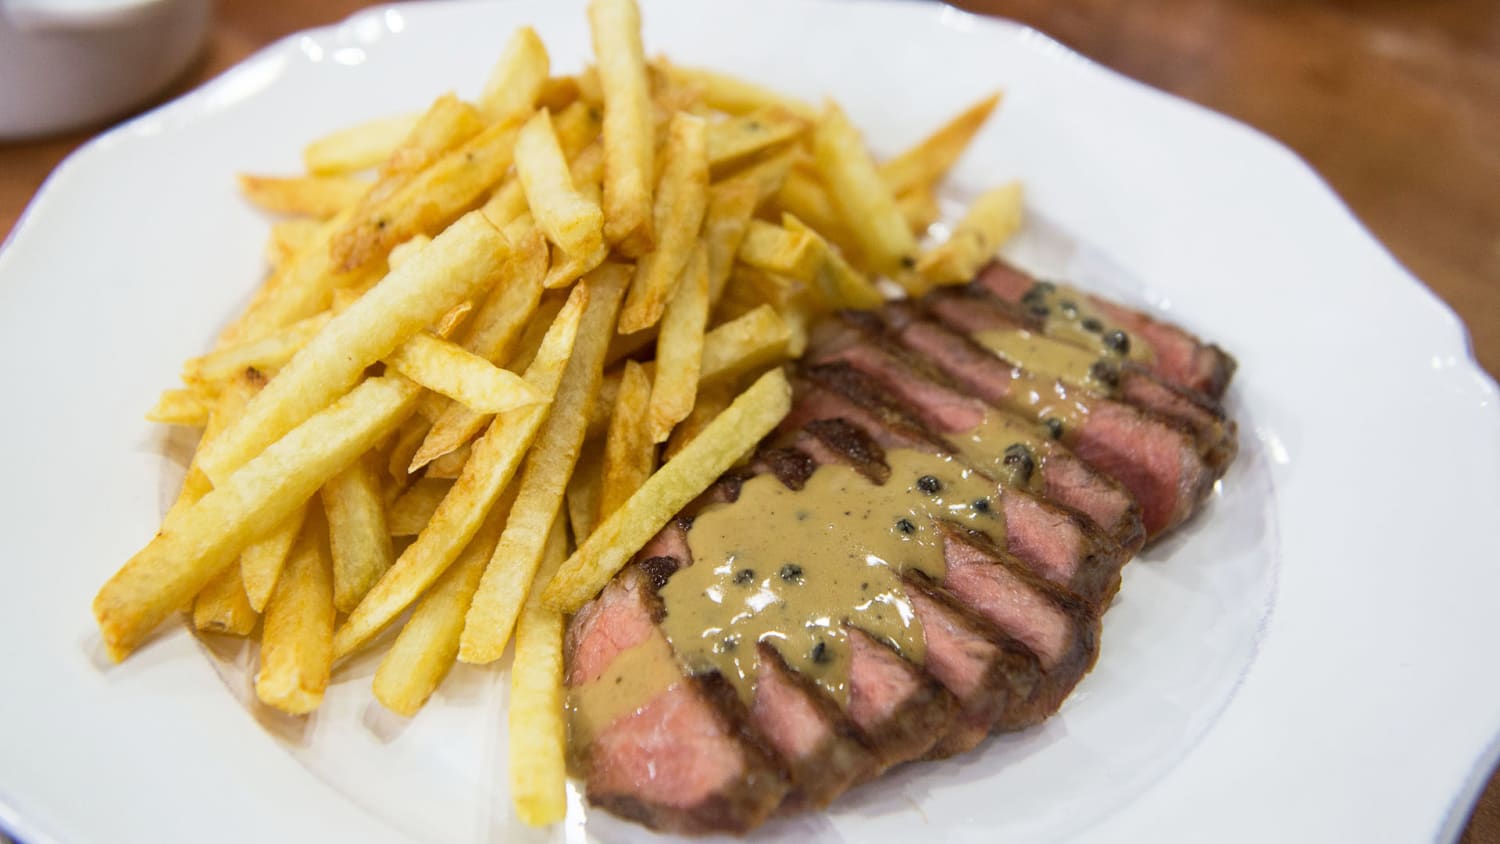 Steak Frites with Au Poivre, Bearnaise and Bordelaise Sauces - TODAY.com